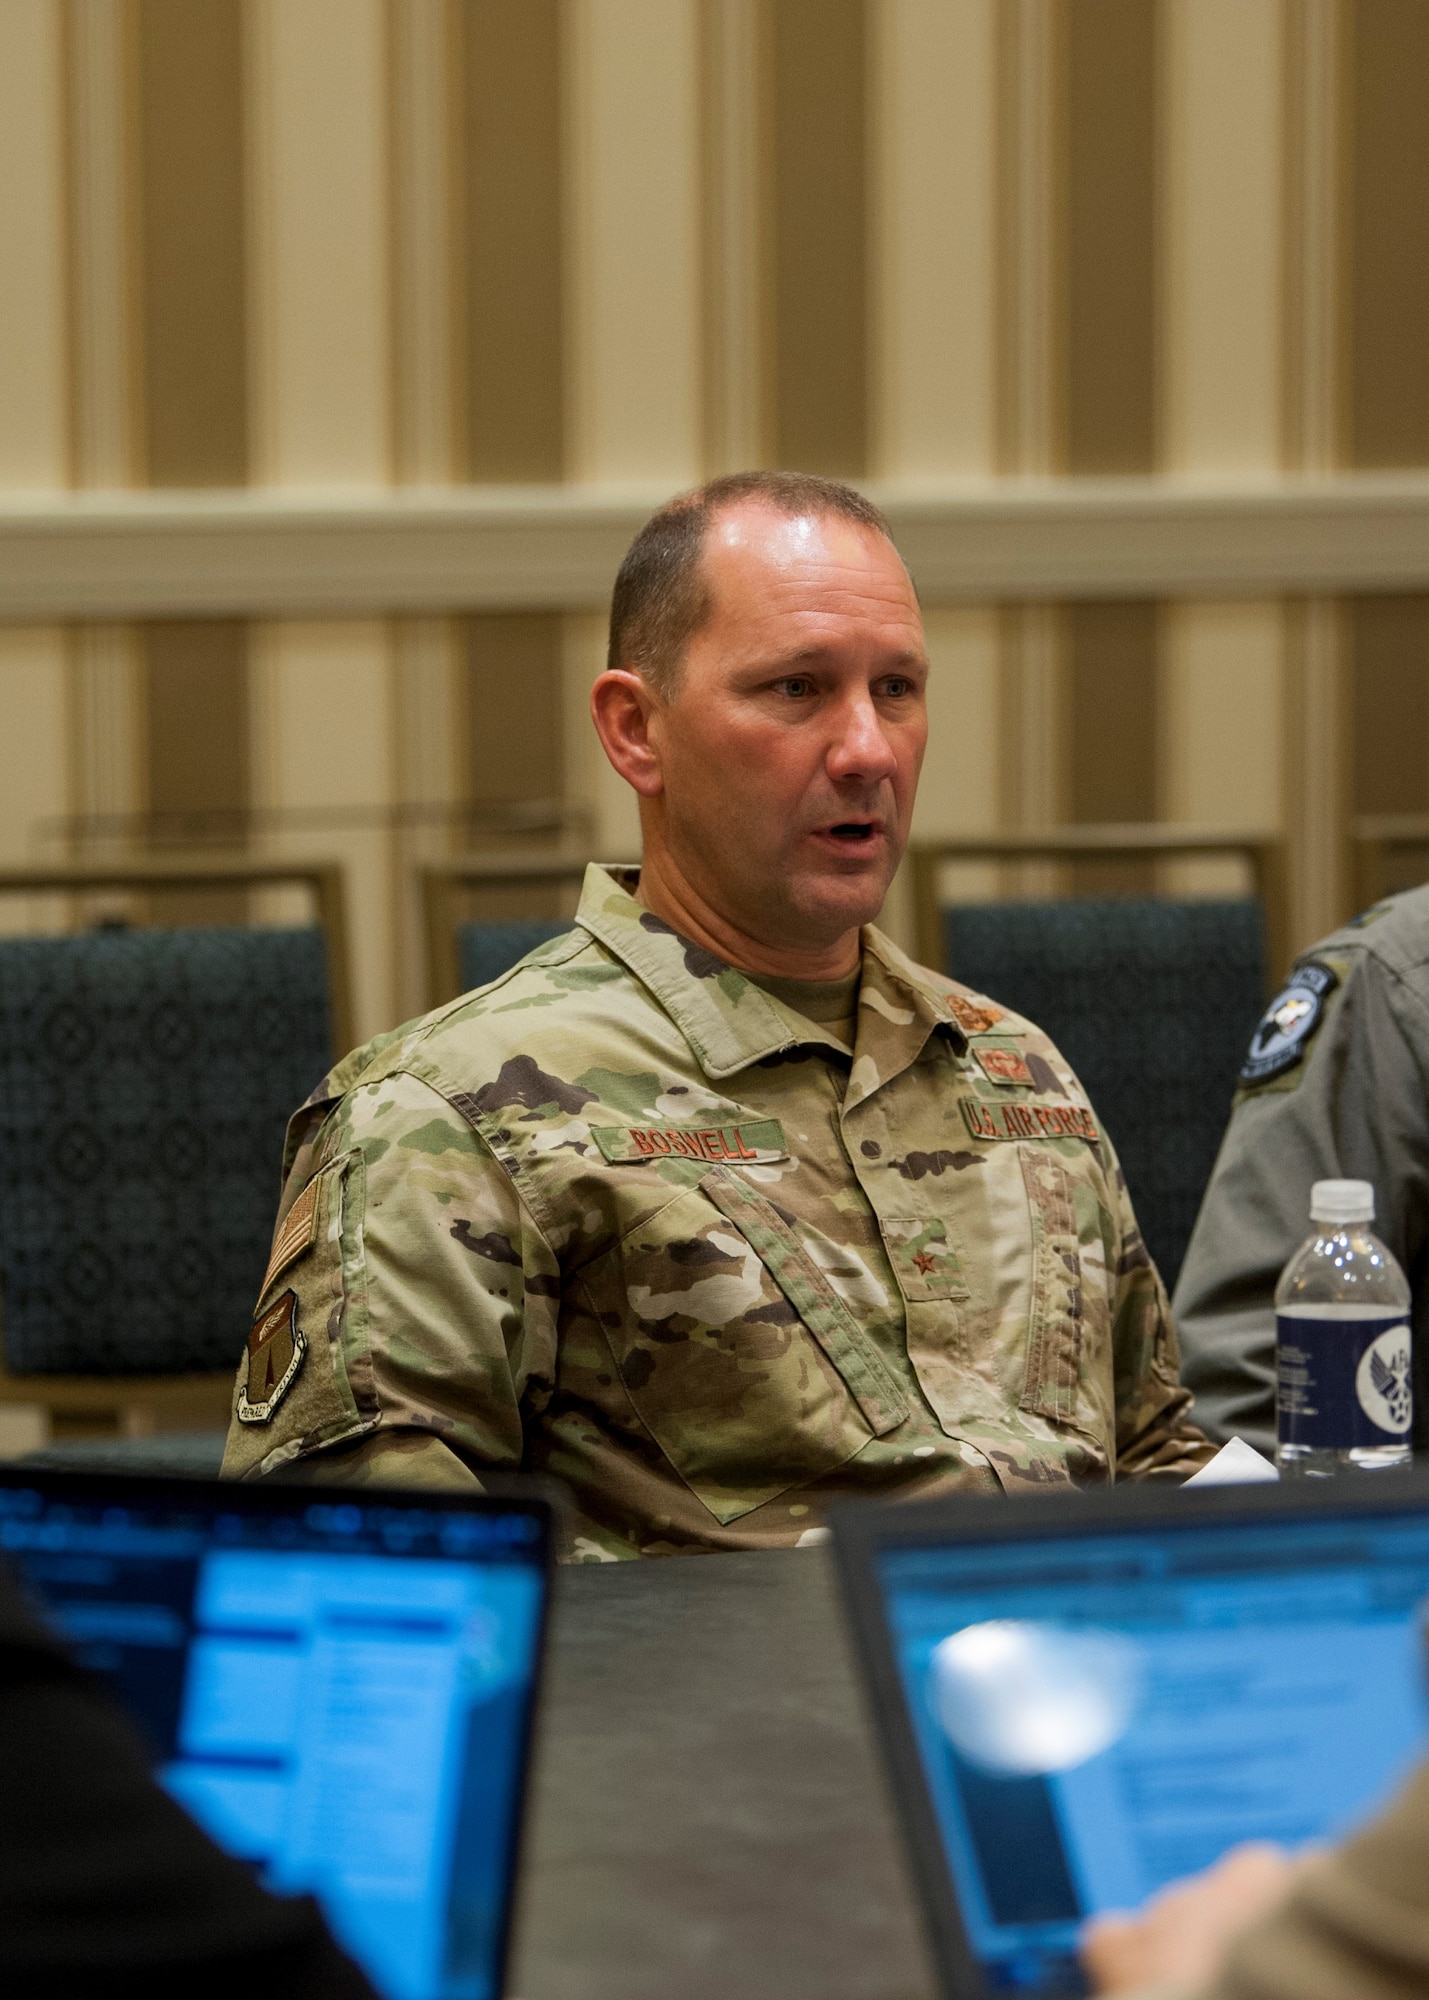 Brig. Gen. Gentry Boswell, 36th Wing commander at Andersen Air Force Base, Guam, addresses a question during a media roundtable at the Gaylord National Resort and Convention Center in National Harbor, Md., Sept. 17, 2019. Wing commanders from across Pacific Air Forces participated in the roundtable during the 2019 Air Force Association’s Air Space and Cyber Conference. (U.S. Air Force photo by Staff Sgt. Mikaley Kline)